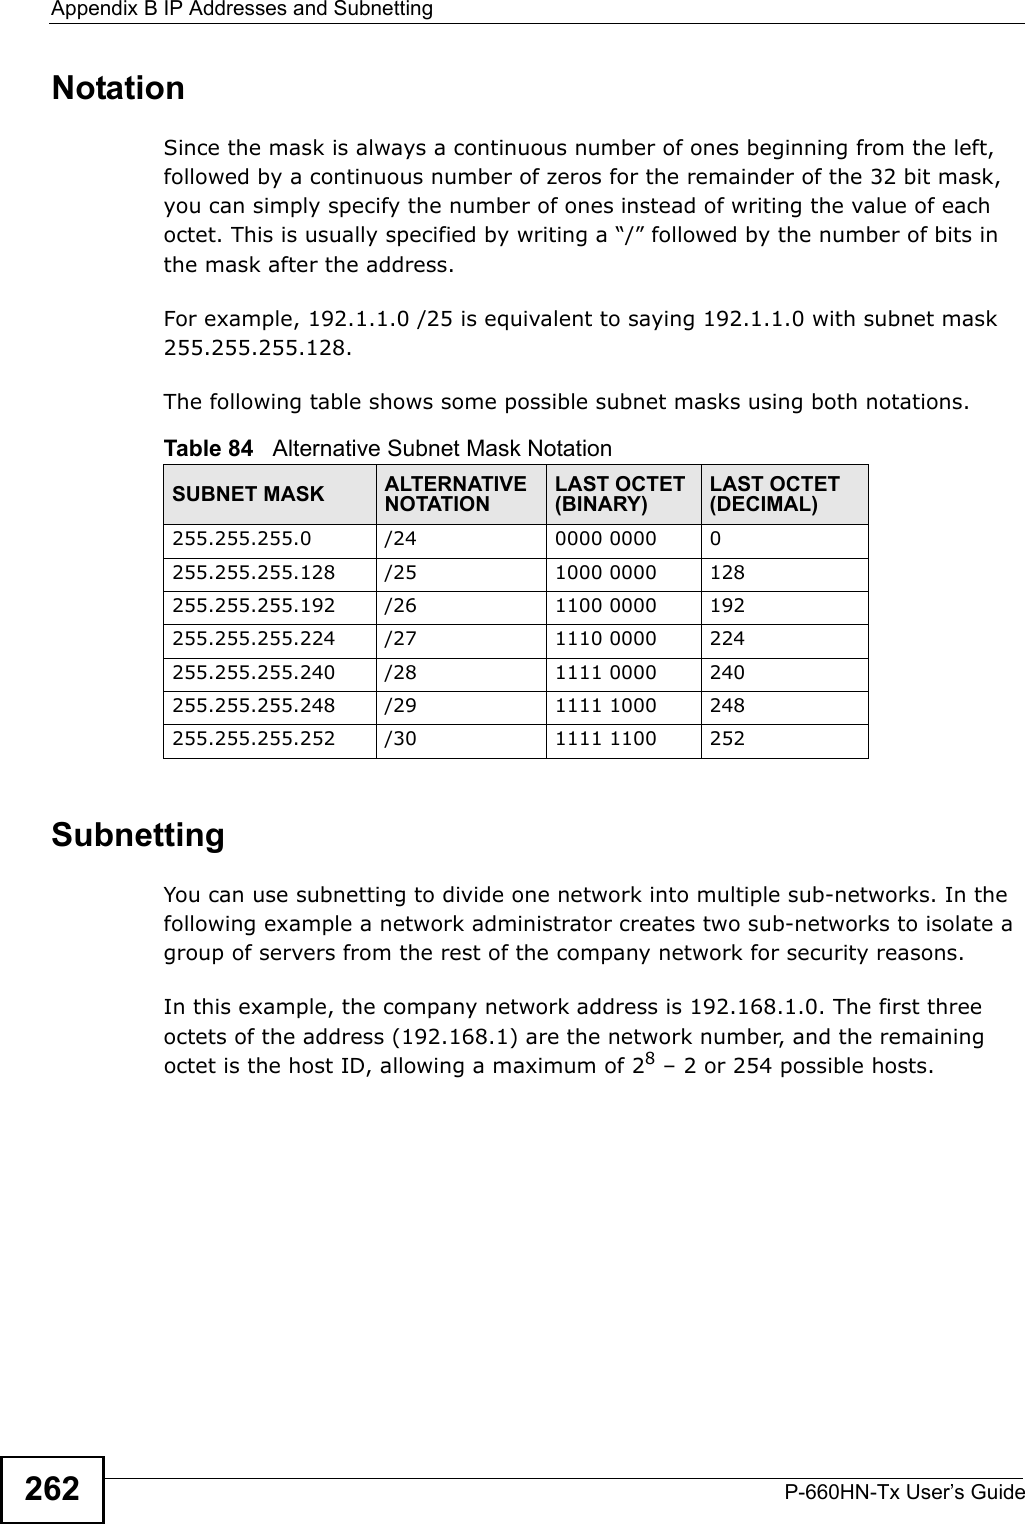 Appendix B IP Addresses and SubnettingP-660HN-Tx User’s Guide262NotationSince the mask is always a continuous number of ones beginning from the left, followed by a continuous number of zeros for the remainder of the 32 bit mask, you can simply specify the number of ones instead of writing the value of each octet. This is usually specified by writing a “/” followed by the number of bits in the mask after the address. For example, 192.1.1.0 /25 is equivalent to saying 192.1.1.0 with subnet mask 255.255.255.128. The following table shows some possible subnet masks using both notations. SubnettingYou can use subnetting to divide one network into multiple sub-networks. In the following example a network administrator creates two sub-networks to isolate a group of servers from the rest of the company network for security reasons.In this example, the company network address is 192.168.1.0. The first three octets of the address (192.168.1) are the network number, and the remaining octet is the host ID, allowing a maximum of 28 – 2 or 254 possible hosts.Table 84   Alternative Subnet Mask NotationSUBNET MASK ALTERNATIVE NOTATIONLAST OCTET (BINARY)LAST OCTET (DECIMAL)255.255.255.0 /24 0000 0000 0255.255.255.128 /25 1000 0000 128255.255.255.192 /26 1100 0000 192255.255.255.224 /27 1110 0000 224255.255.255.240 /28 1111 0000 240255.255.255.248 /29 1111 1000 248255.255.255.252 /30 1111 1100 252